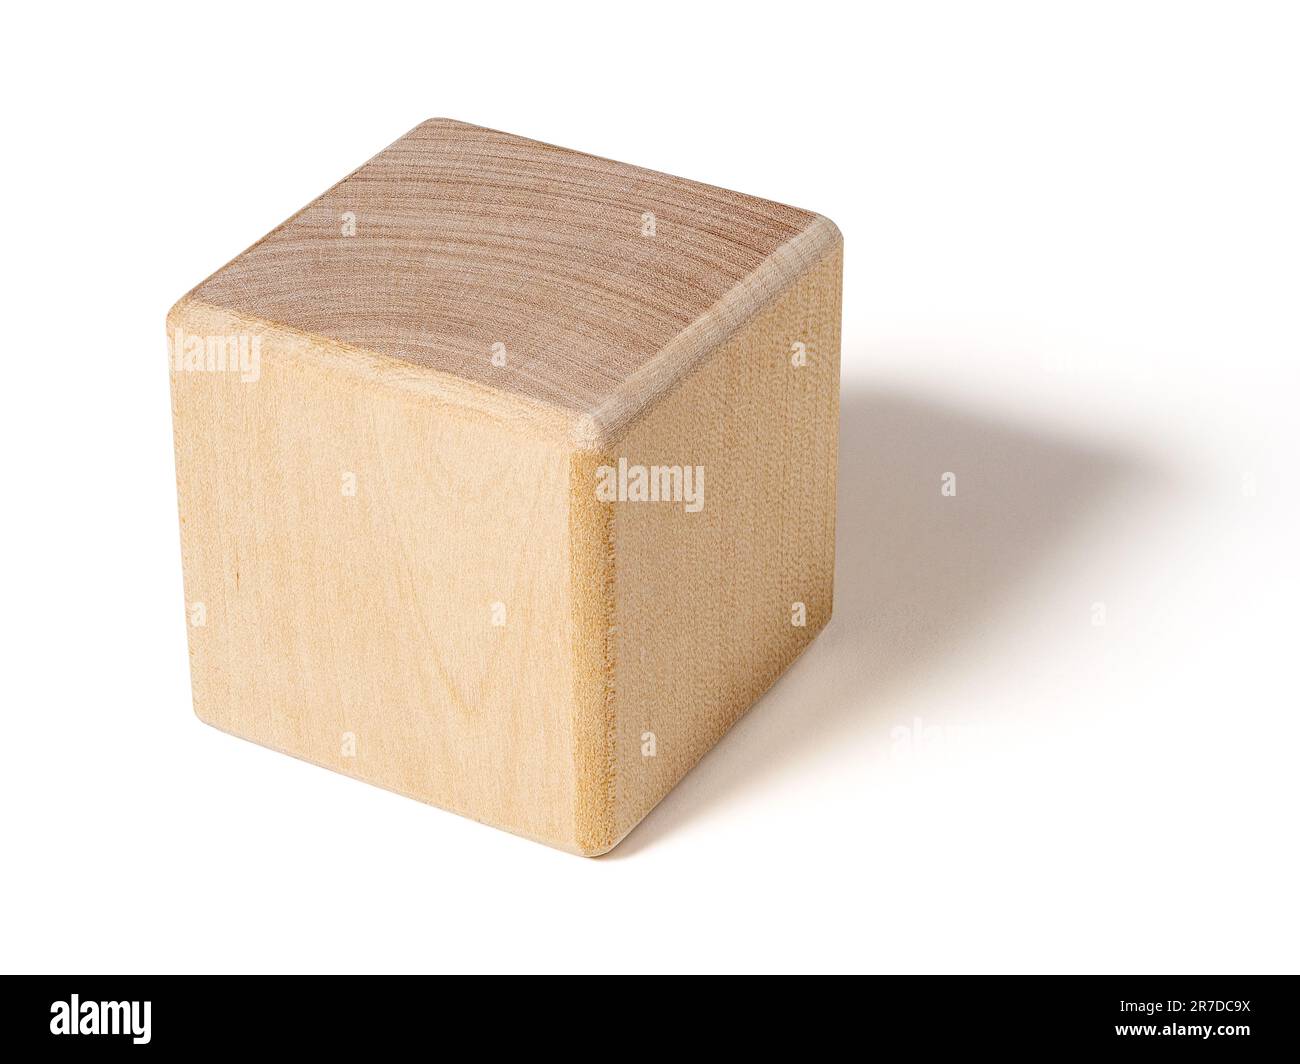 Wooden toy as square wood block with shadow isolated on white Stock Photo